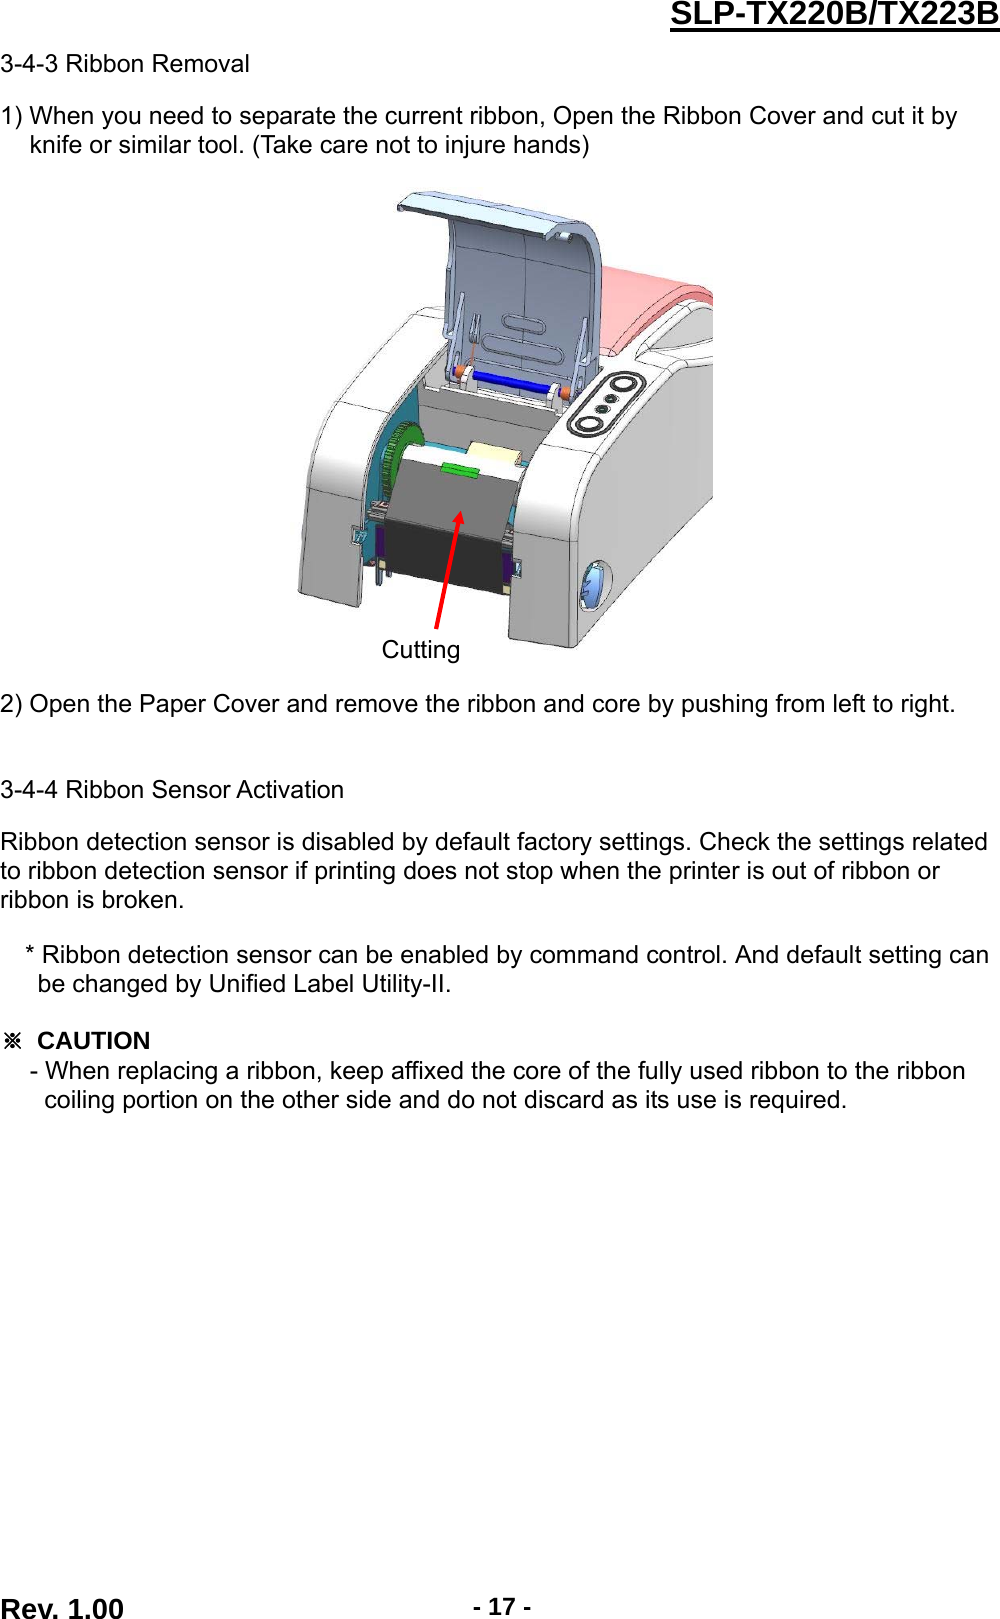  Rev. 1.00  - 17 -SLP-TX220B/TX223B3-4-3 Ribbon Removal  1) When you need to separate the current ribbon, Open the Ribbon Cover and cut it by knife or similar tool. (Take care not to injure hands)    2) Open the Paper Cover and remove the ribbon and core by pushing from left to right.   3-4-4 Ribbon Sensor Activation  Ribbon detection sensor is disabled by default factory settings. Check the settings related to ribbon detection sensor if printing does not stop when the printer is out of ribbon or ribbon is broken.  * Ribbon detection sensor can be enabled by command control. And default setting can   be changed by Unified Label Utility-II.  ※ CAUTION - When replacing a ribbon, keep affixed the core of the fully used ribbon to the ribbon coiling portion on the other side and do not discard as its use is required. Cutting